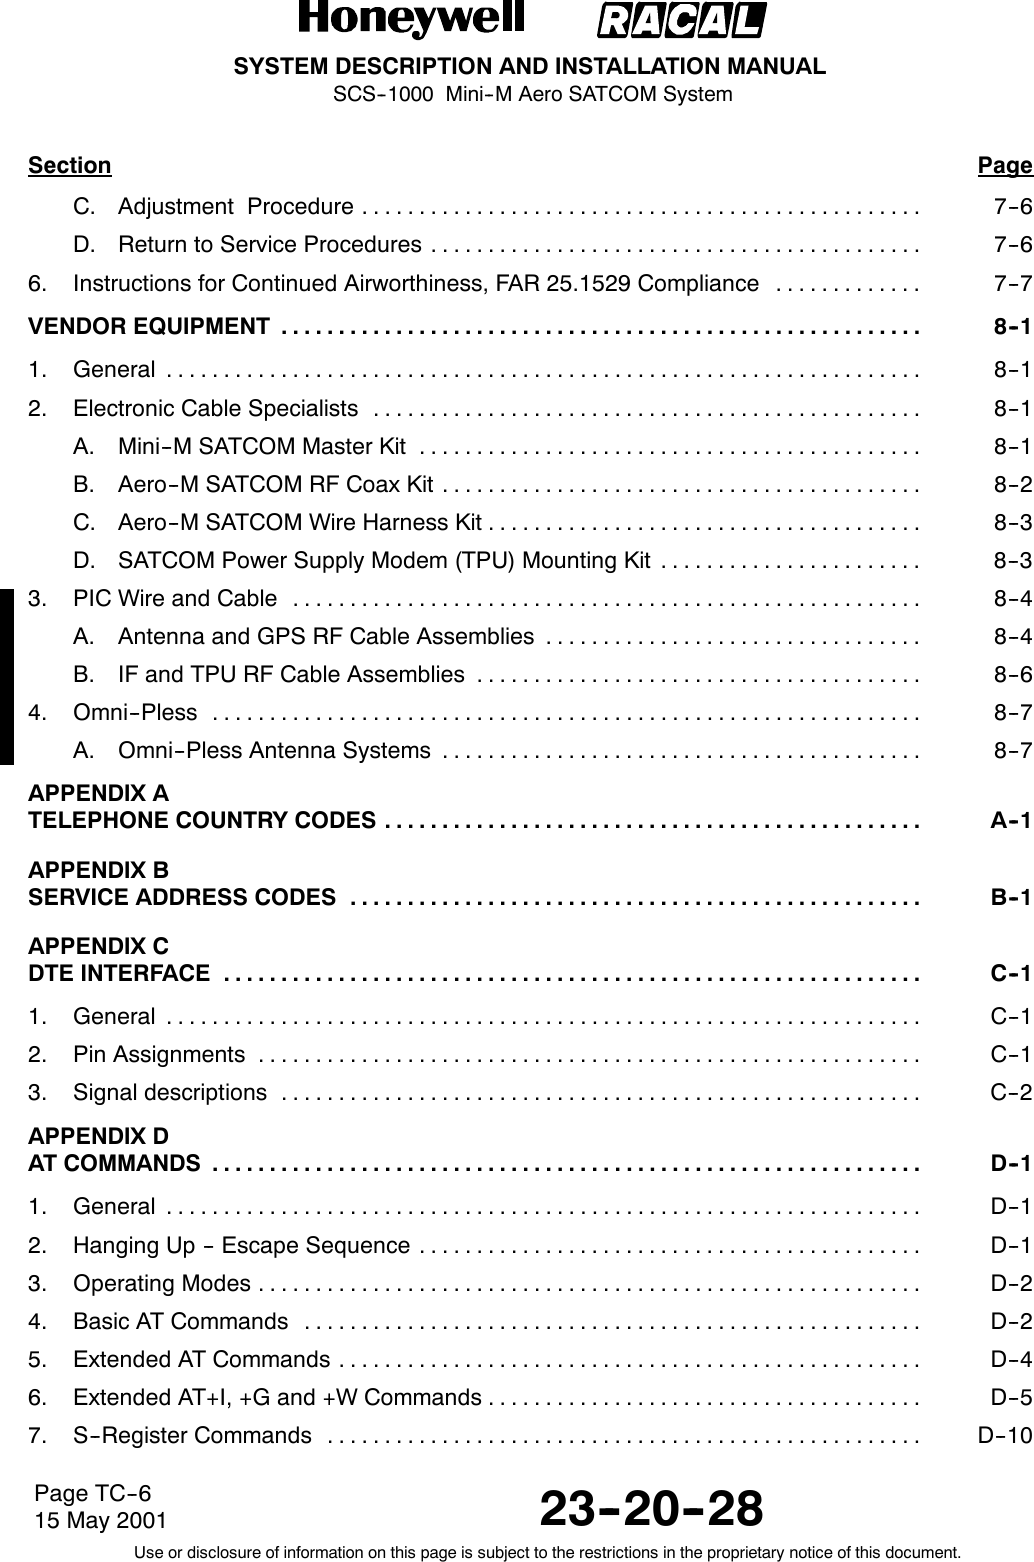 SYSTEM DESCRIPTION AND INSTALLATION MANUALSCS--1000 Mini--M Aero SATCOM System23--20--28Use or disclosure of information on this page is subject to the restrictions in the proprietary notice of this document.Page TC--615 May 2001Section PageC. Adjustment Procedure 7--6.................................................D. Return to Service Procedures 7--6...........................................6. Instructions for Continued Airworthiness, FAR 25.1529 Compliance 7--7.............VENDOR EQUIPMENT 8--1........................................................1. General 8--1..................................................................2. Electronic Cable Specialists 8--1................................................A. Mini--MSATCOMMasterKit 8--1............................................B. Aero--M SATCOM RF Coax Kit 8--2..........................................C. Aero--M SATCOM Wire Harness Kit 8--3......................................D. SATCOM Power Supply Modem (TPU) Mounting Kit 8--3.......................3. PIC Wire and Cable 8--4.......................................................A. Antenna and GPS RF Cable Assemblies 8--4.................................B. IF and TPU RF Cable Assemblies 8--6.......................................4. Omni--Pless 8--7..............................................................A. Omni--Pless Antenna Systems 8--7..........................................APPENDIX ATELEPHONE COUNTRY CODES A--1...............................................APPENDIX BSERVICE ADDRESS CODES B--1..................................................APPENDIX CDTE INTERFACE C--1.............................................................1. General C--1..................................................................2. Pin Assignments C--1..........................................................3. Signal descriptions C--2........................................................APPENDIX DAT COMMANDS D--1..............................................................1. General D--1..................................................................2. Hanging Up -- Escape Sequence D--1............................................3. Operating Modes D--2..........................................................4. Basic AT Commands D--2......................................................5. Extended AT Commands D--4...................................................6. Extended AT+I, +G and +W Commands D--5......................................7. S--Register Commands D--10....................................................